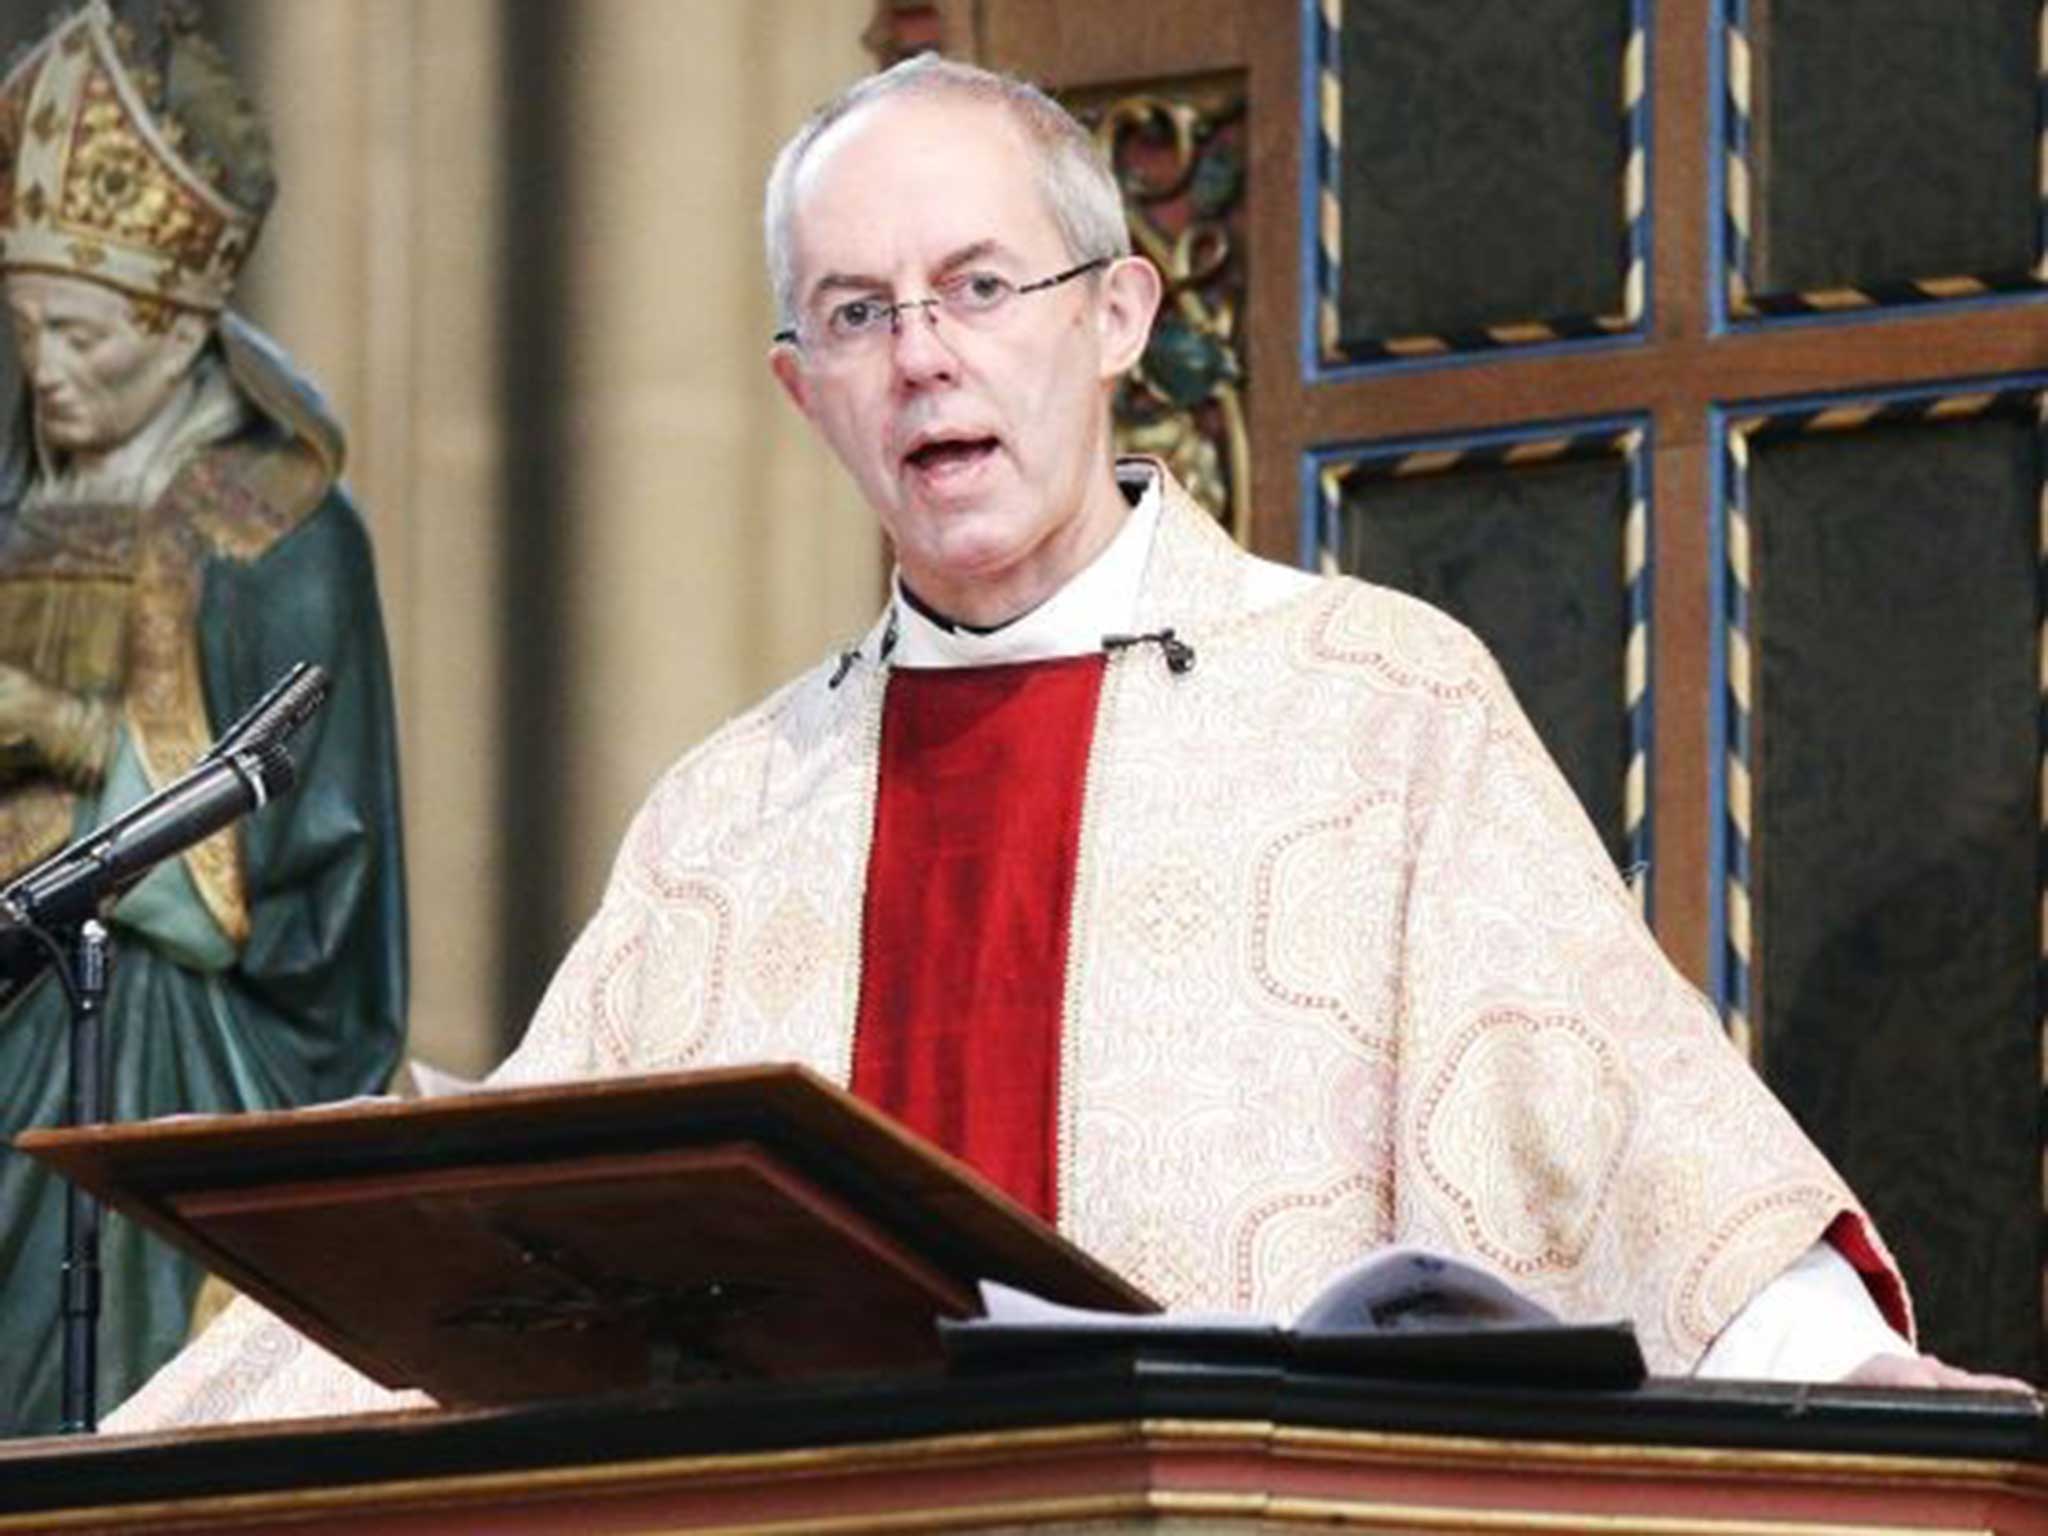 &#13;
Welby gave his annual Christmas Day sermon at Canterbury Cathedral &#13;